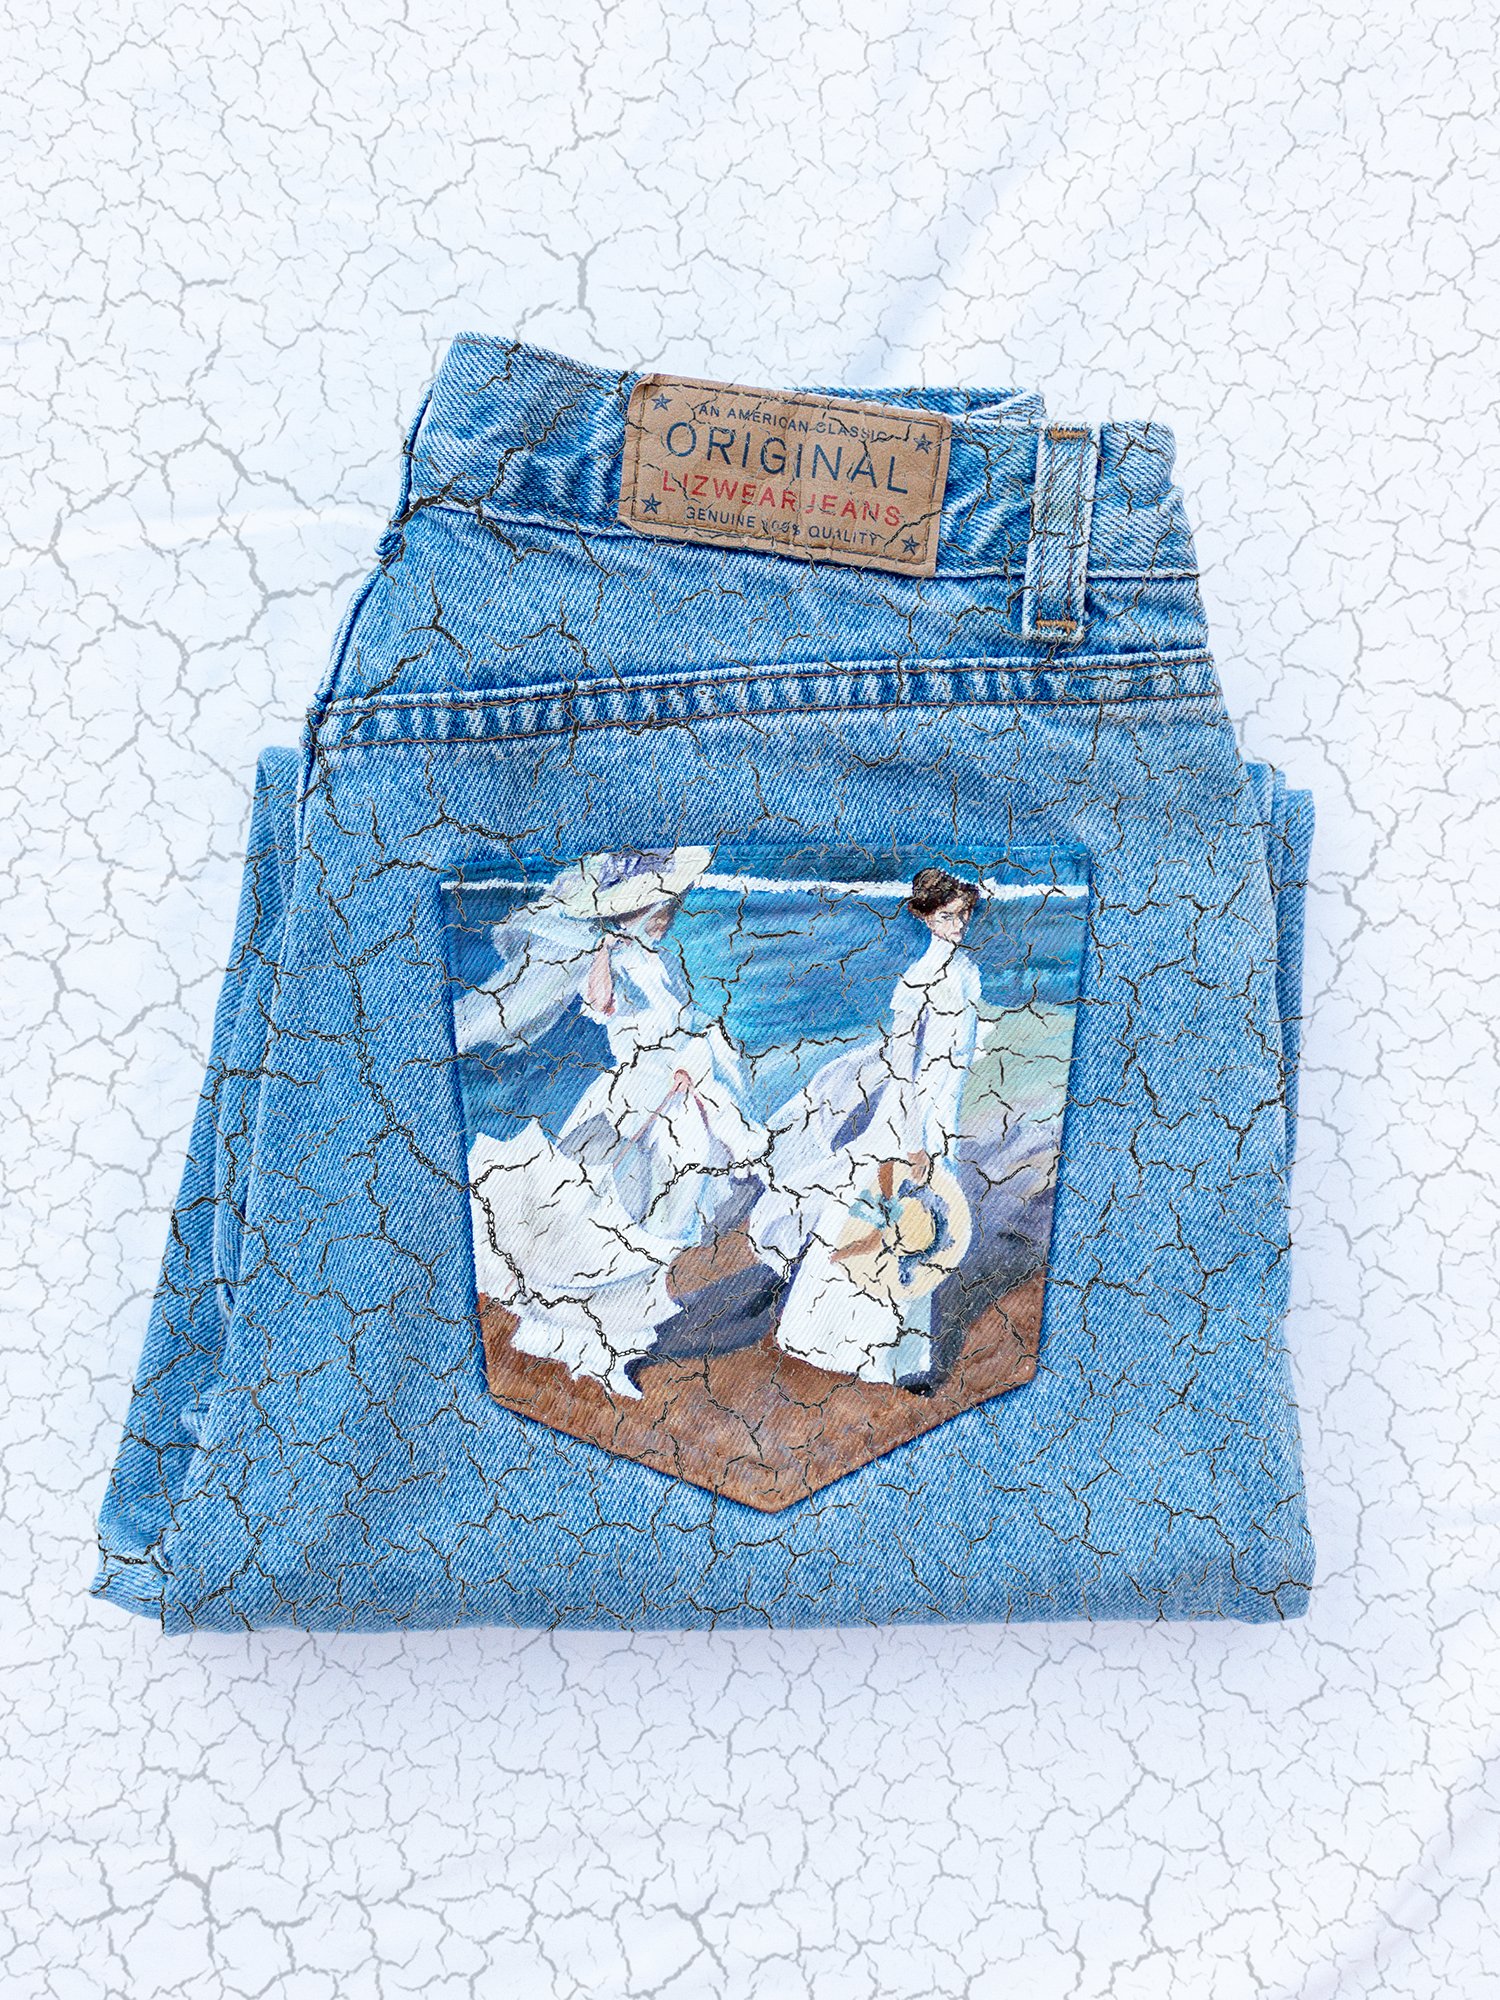 Denim Painting 101: How to Avoid Cracking